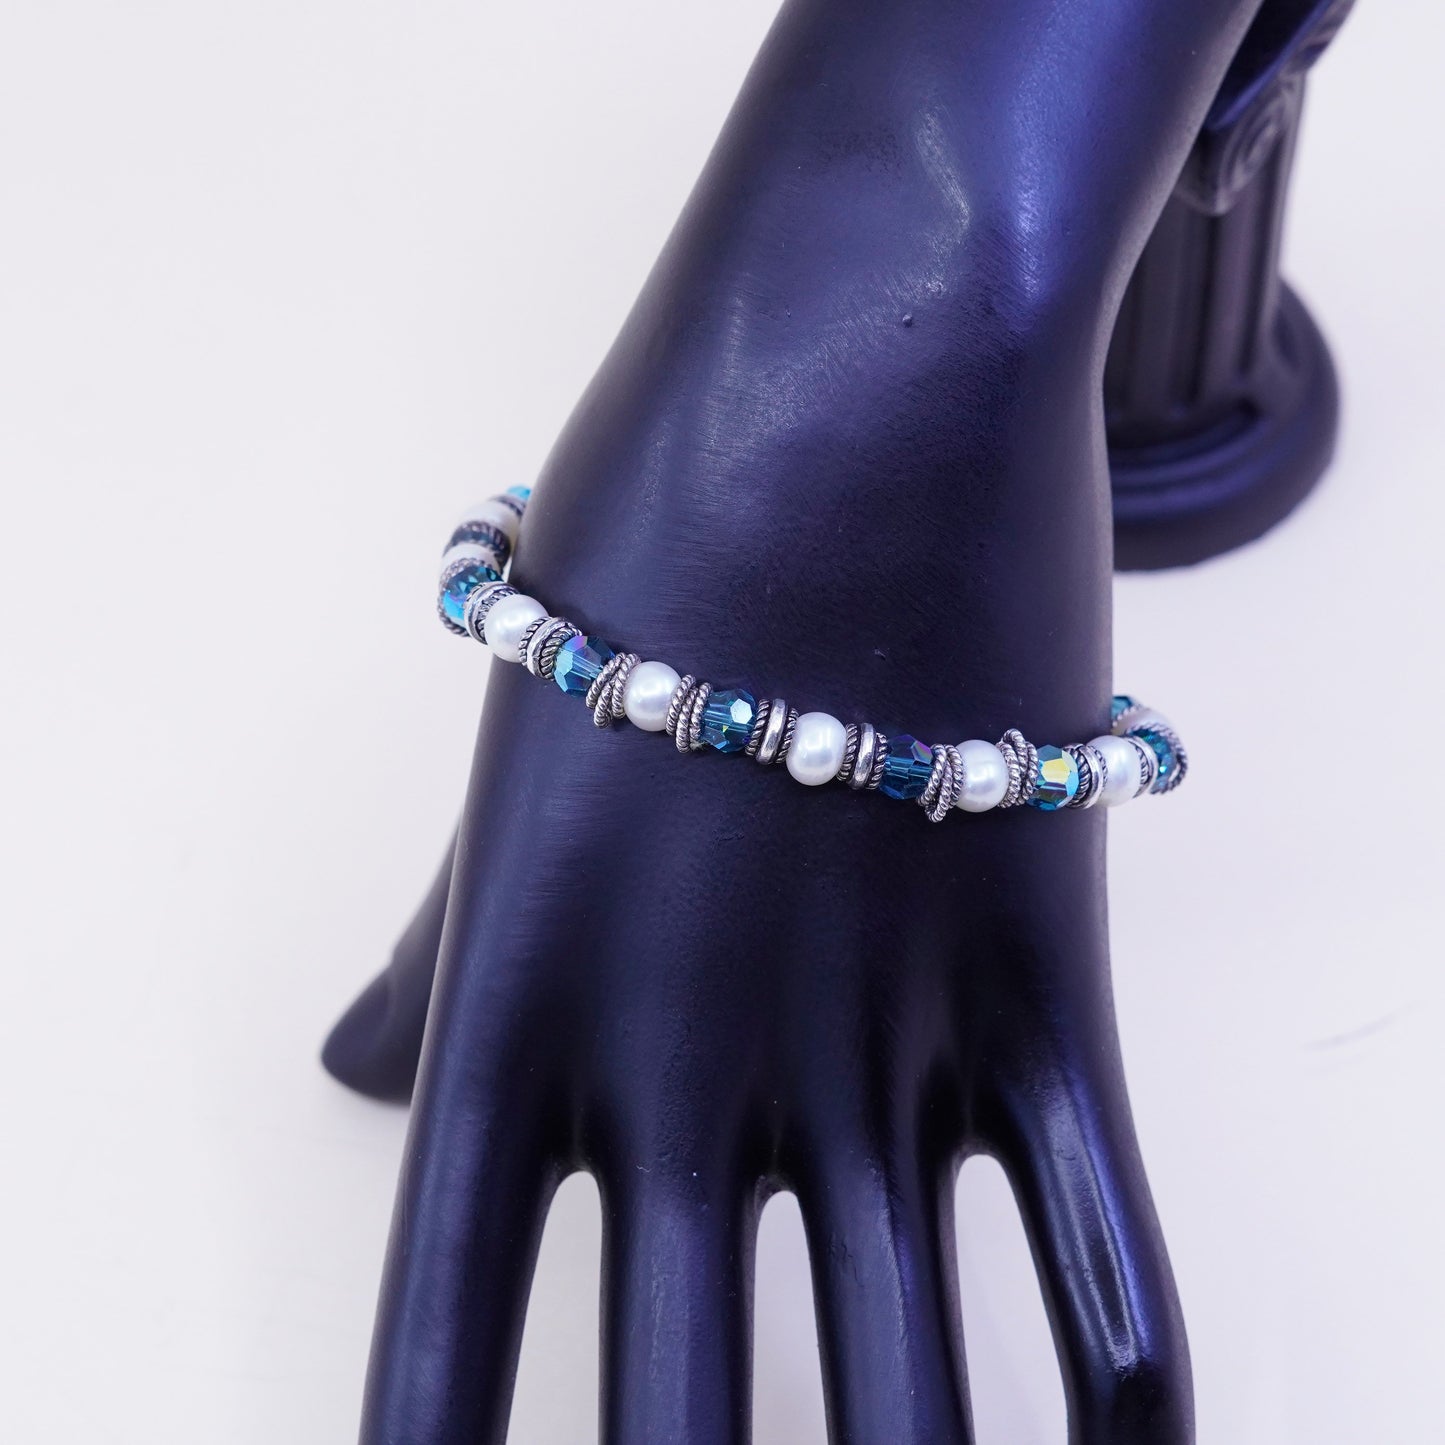 7”, Sterling 925 silver bracelet, pearl blue crystal and breast cancer ribbon